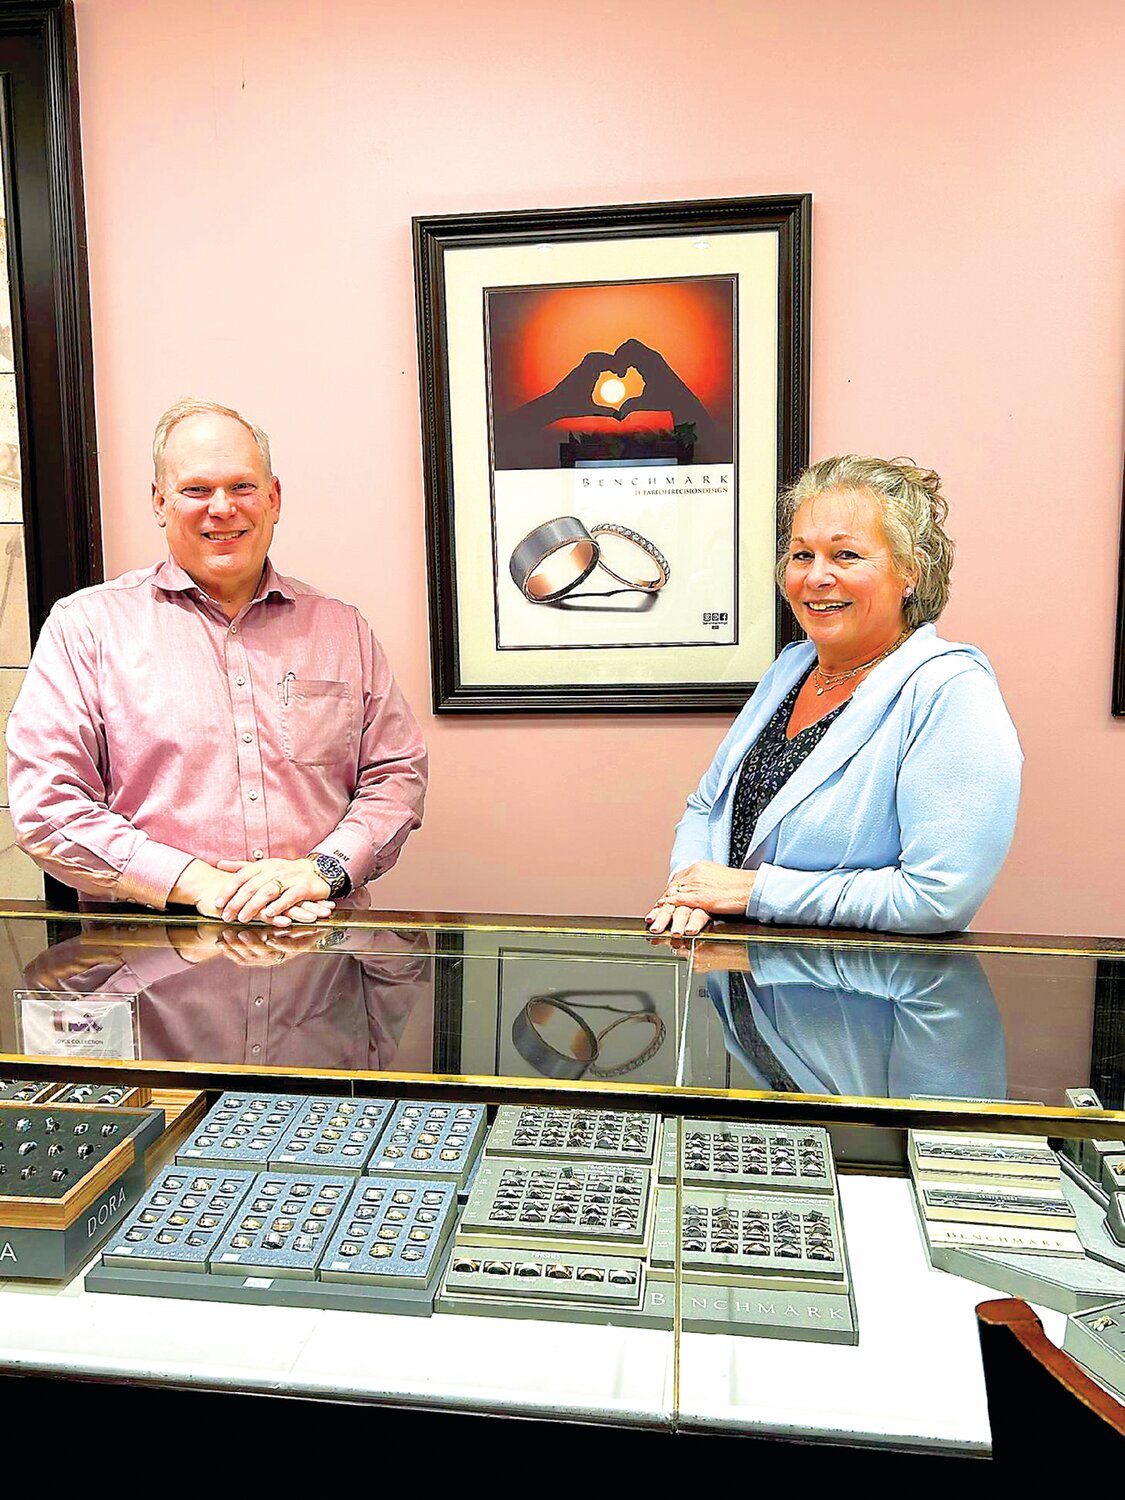 Doug Mortimer and Kathi Stefany have fun selling jewelry to people marking happy occasions.